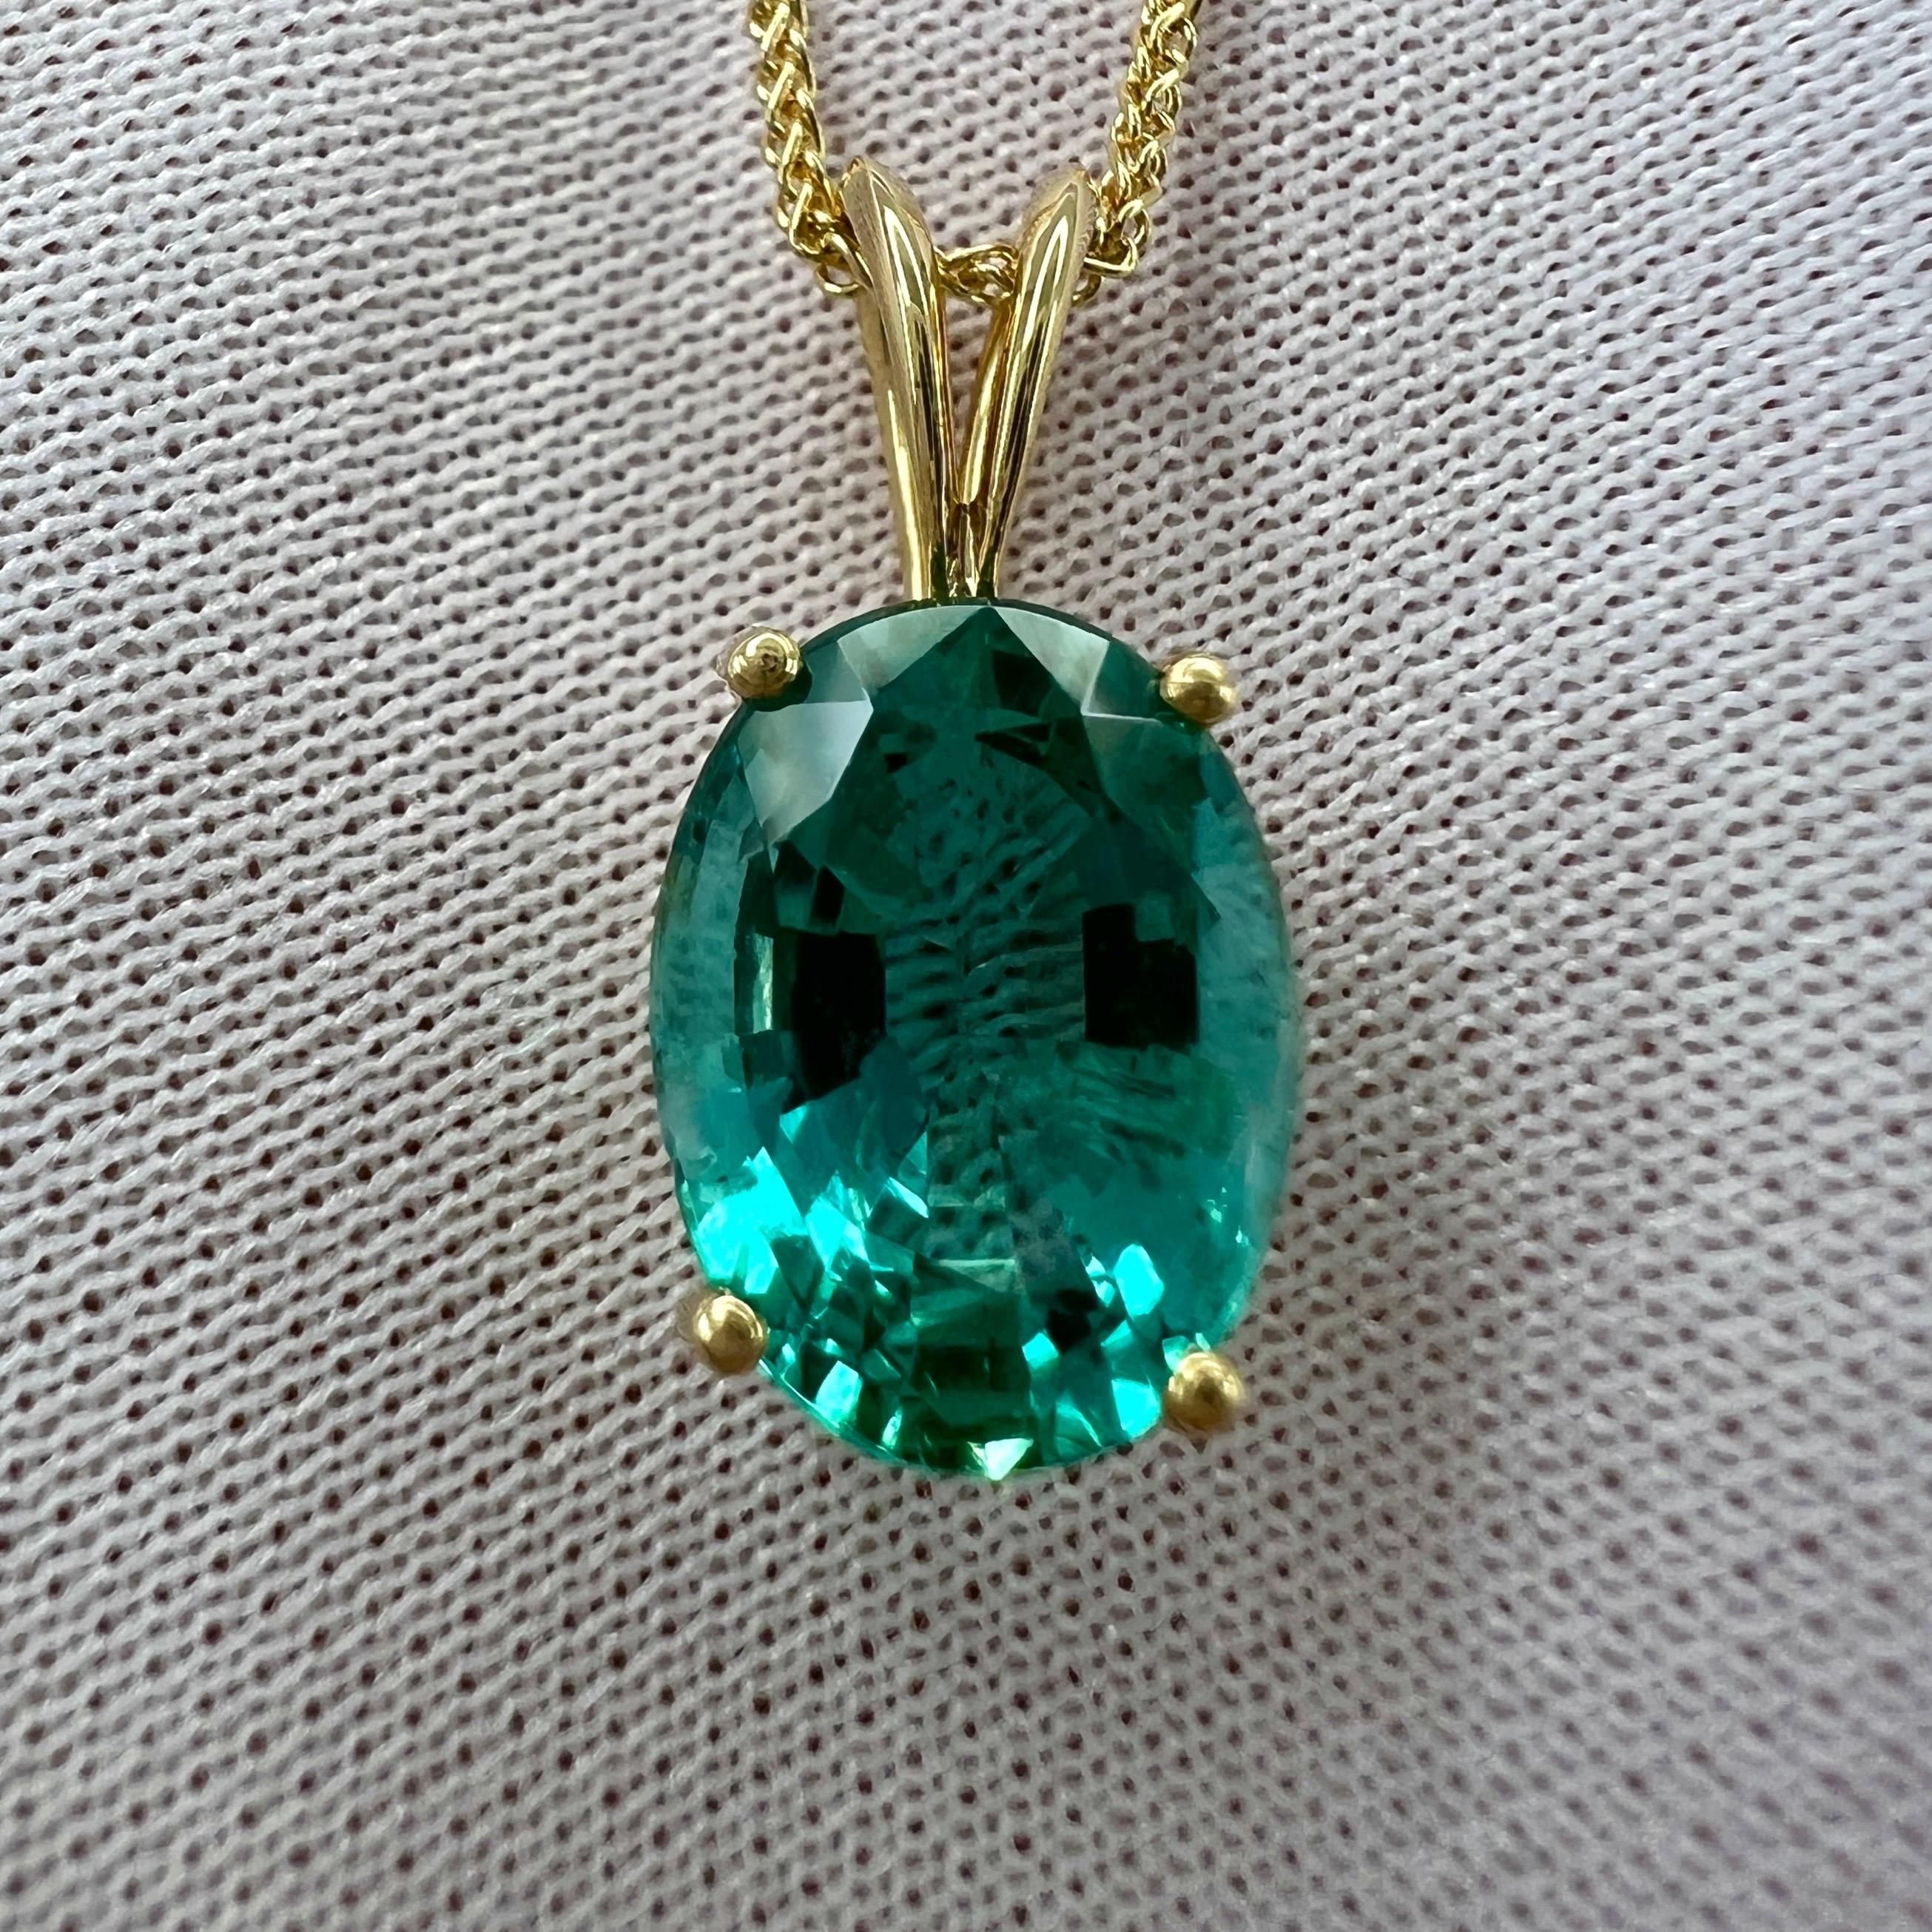 GIA Certified 2.95ct Vivid Blue Green Oval Cut Emerald 18k Gold Pendant Necklace For Sale 7